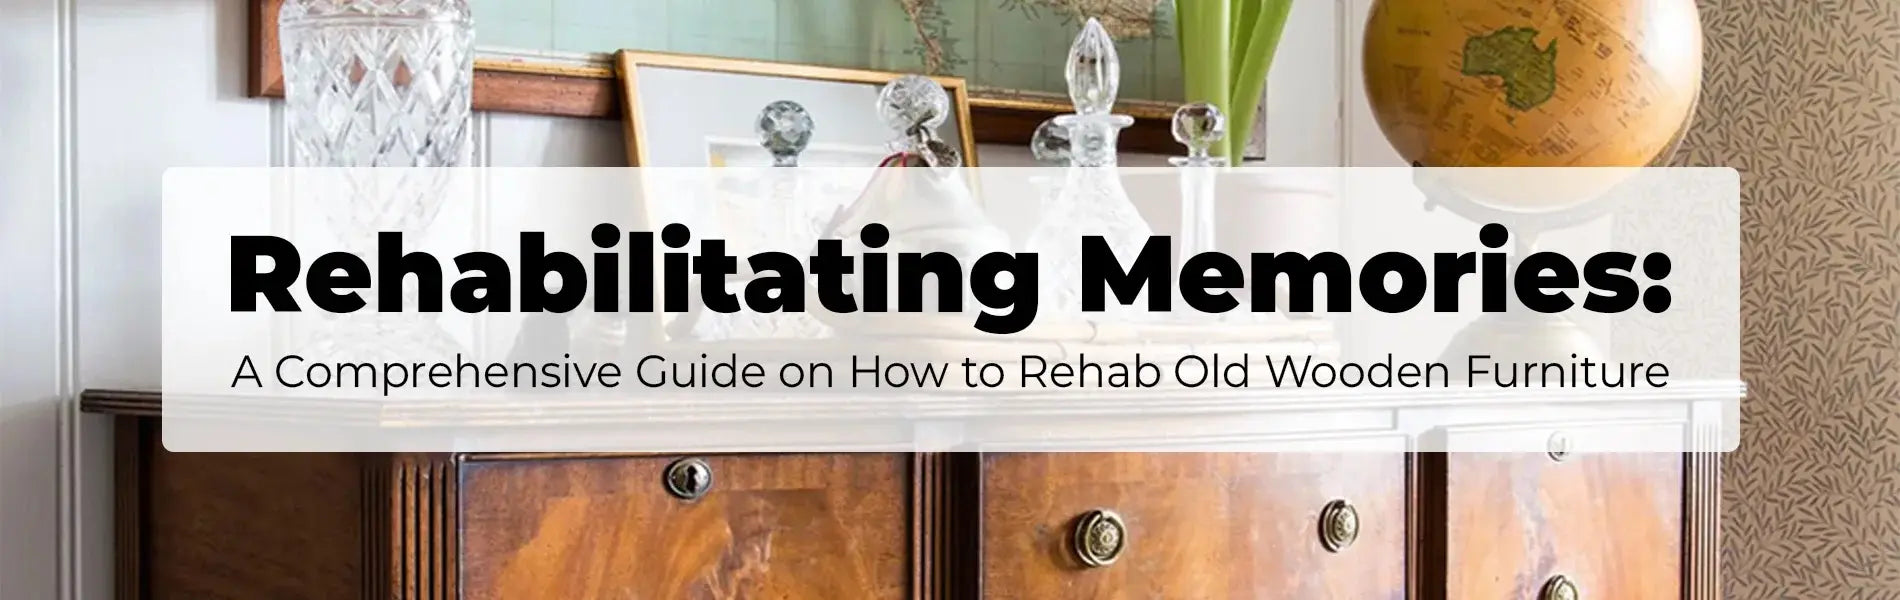 Rehabilitating-Memories-A-Comprehensive-Guide-on-How-to-Rehab-Old-Wooden-Furniture Exotic Wood Zone